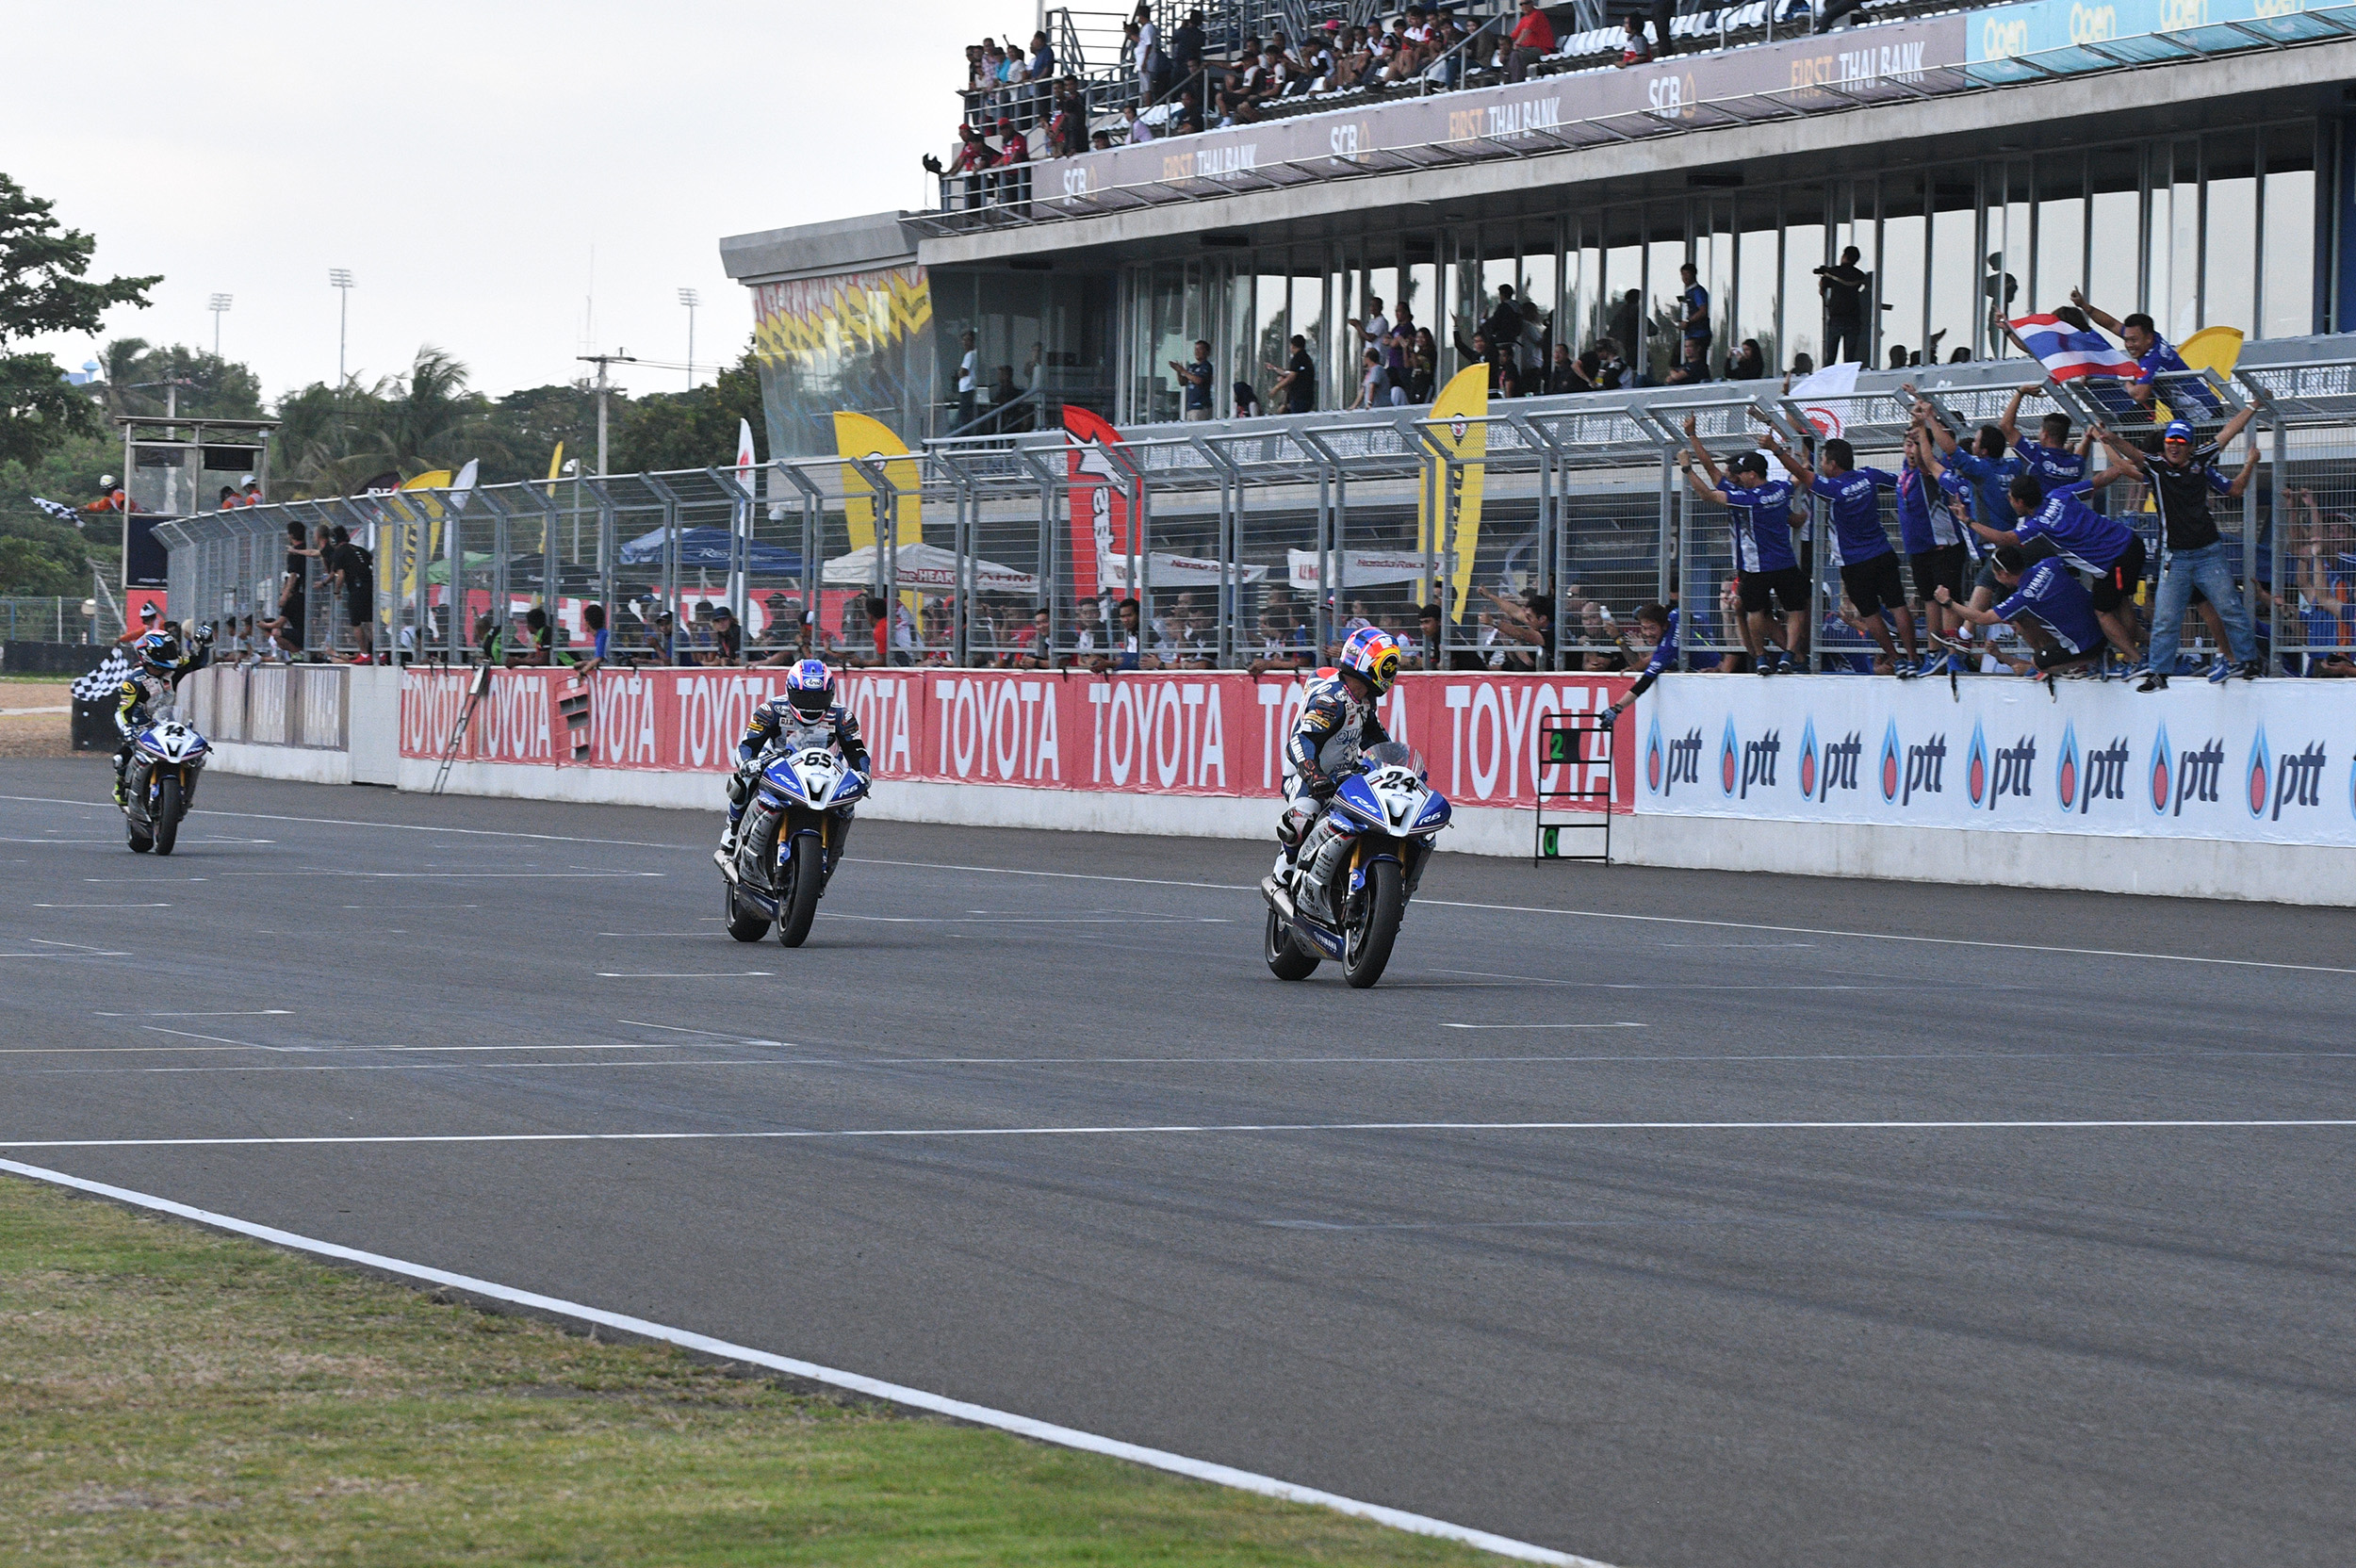 YAMAHA TRIO SEIZED THE DAY; TITLE CHASE NARROWED TO TWO RIDERS